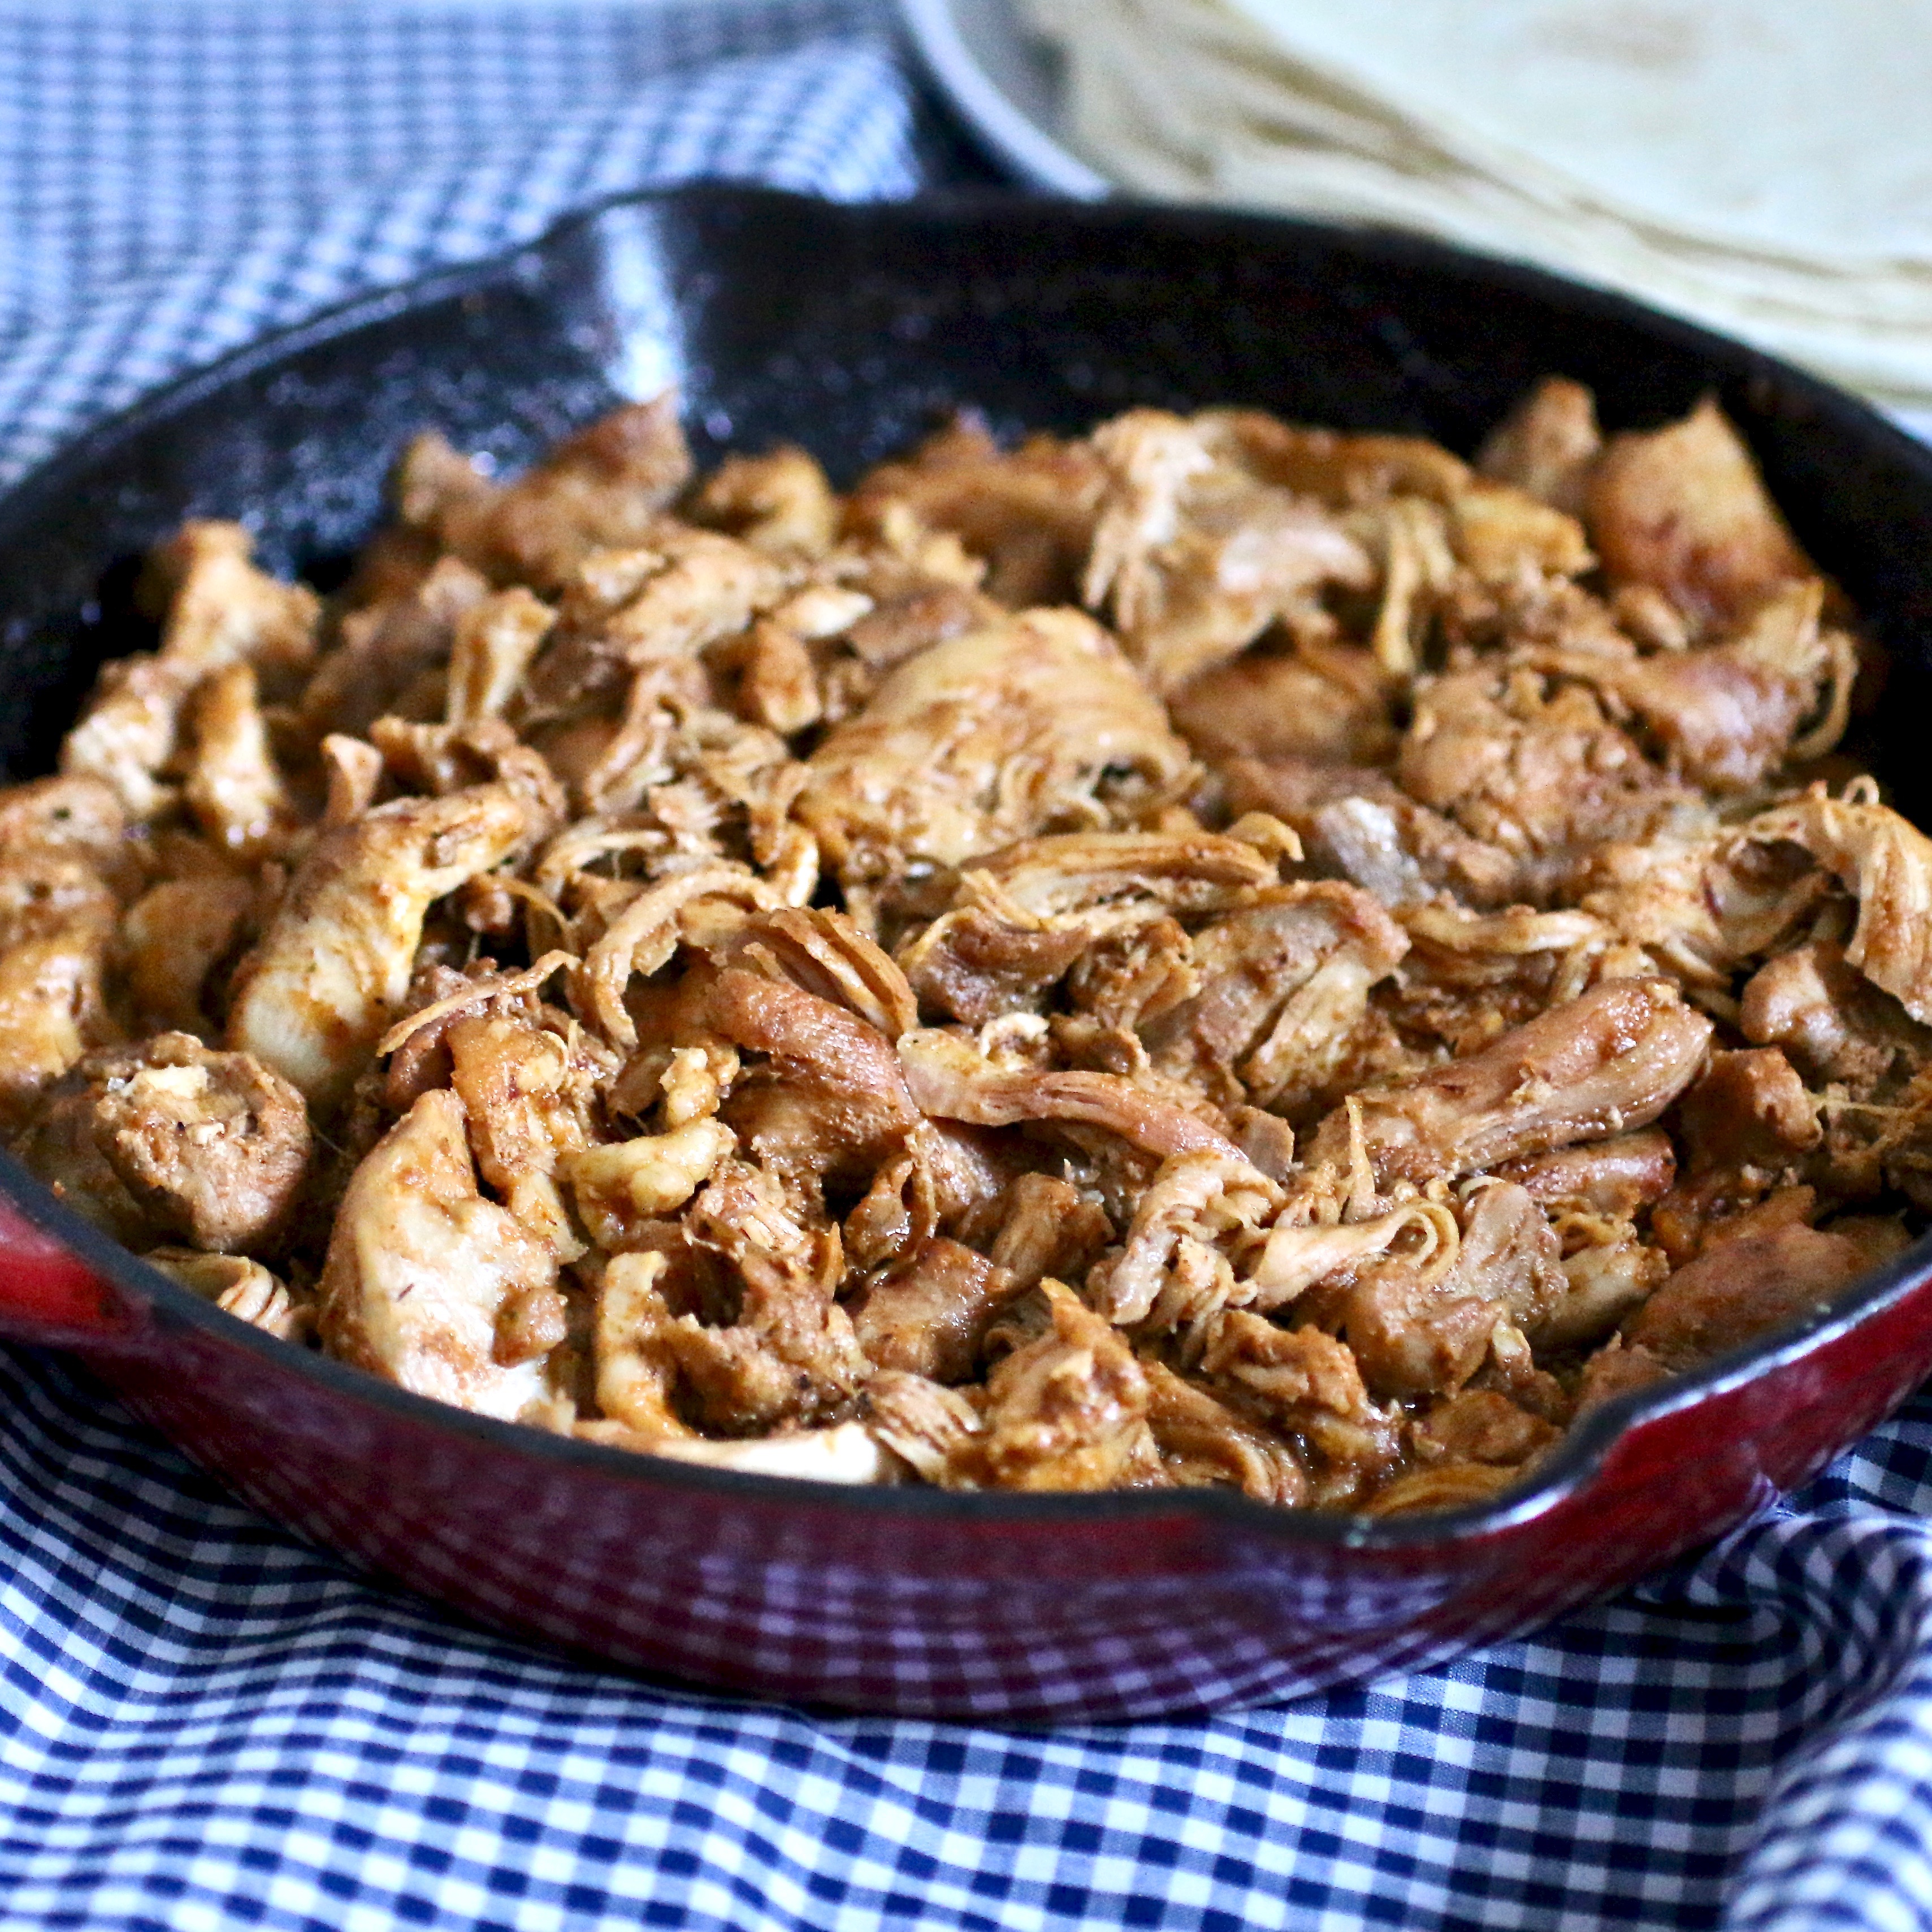 <p>A simple can of chipotle peppers in adobo sauce is the key to this recipe. Combined with chicken thighs, onions, garlic, cilantro, cumin, and cayenne, the result is a super-flavorful filling for burritos, enchiladas, tacos, and tostadas. </p>
                          